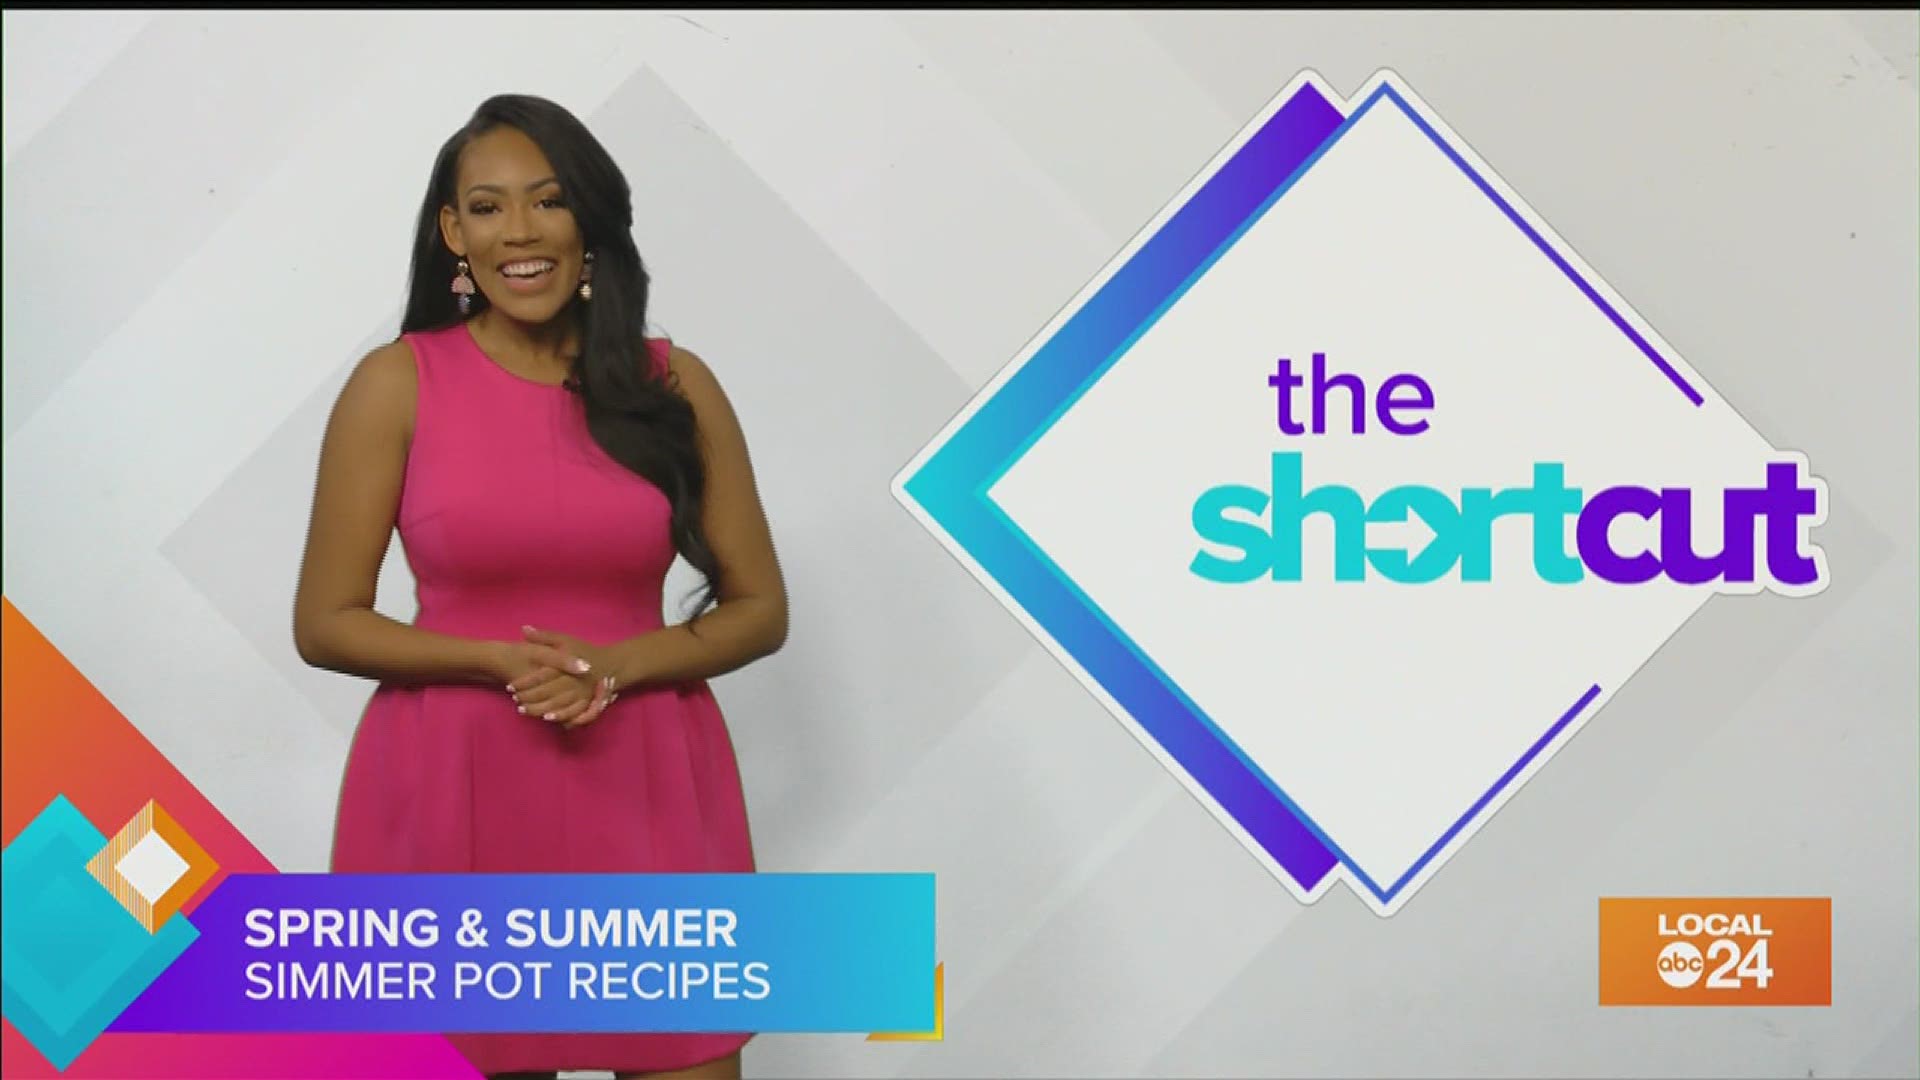 Join Sydney Neely as we take a look at two easy simmering potpourri recipes: one for spring and one for summer!